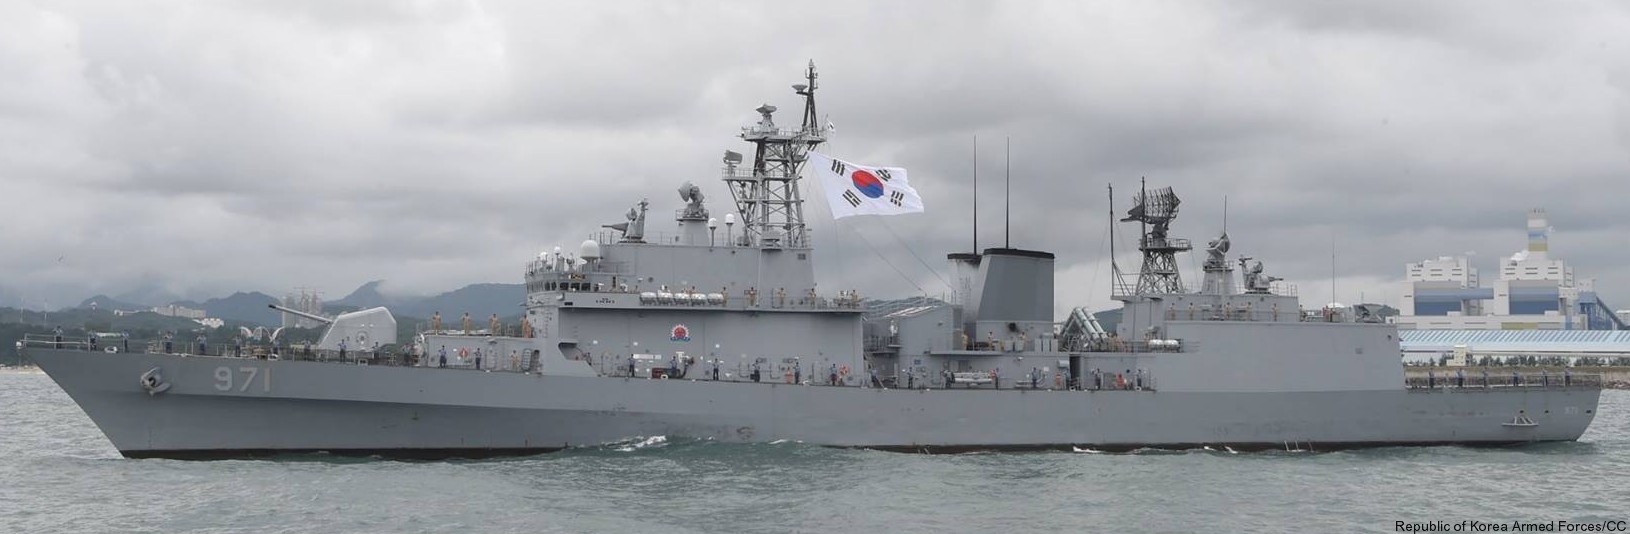 ddh-971 roks gwanggaeto the great destroyer republic of korea navy rokn sea sparrow missile helicopter 13